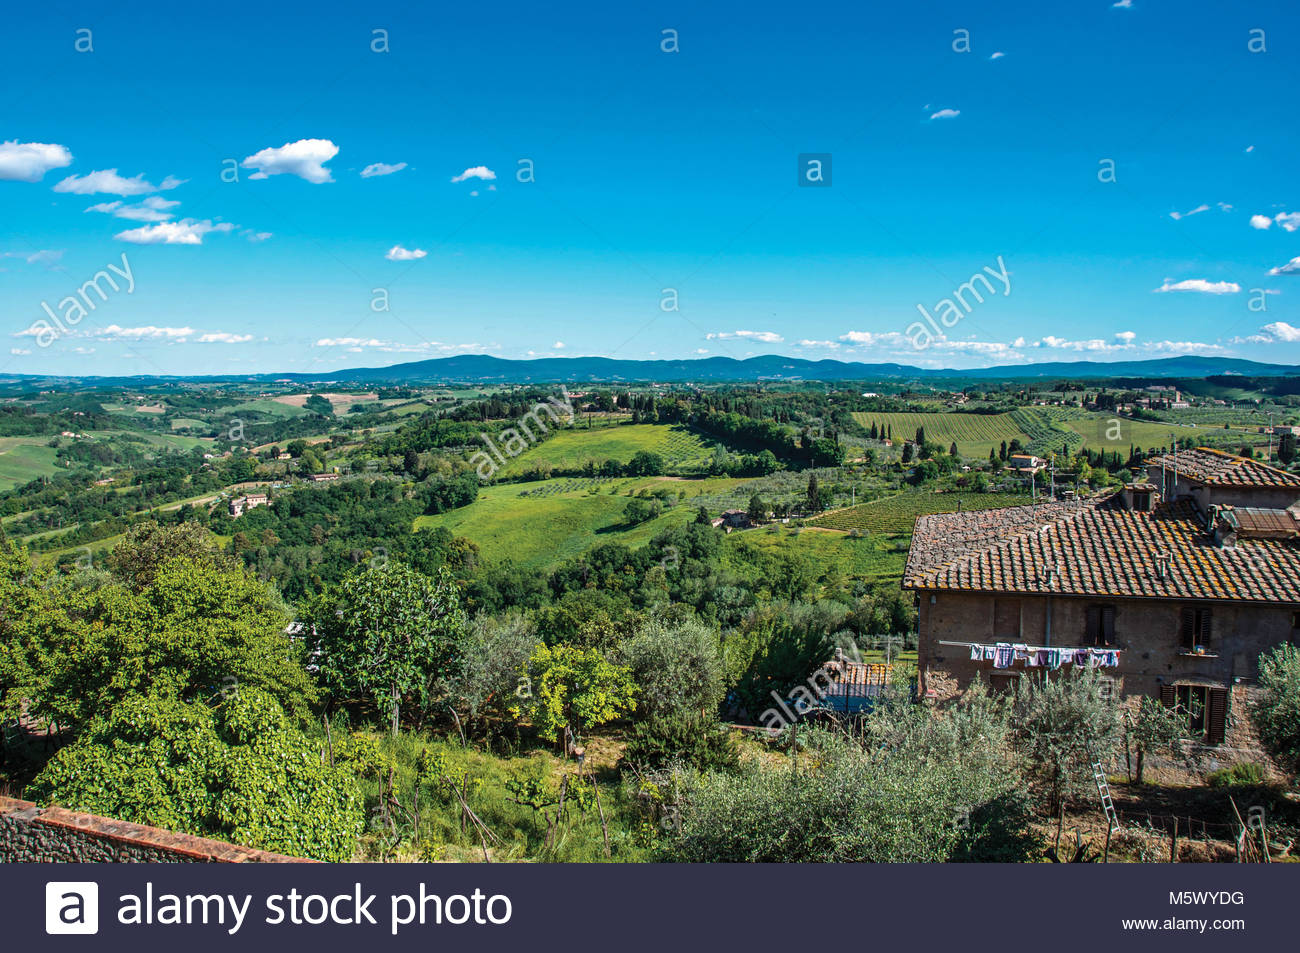 Over Of House With Green Tuscan Hills In The Background At San